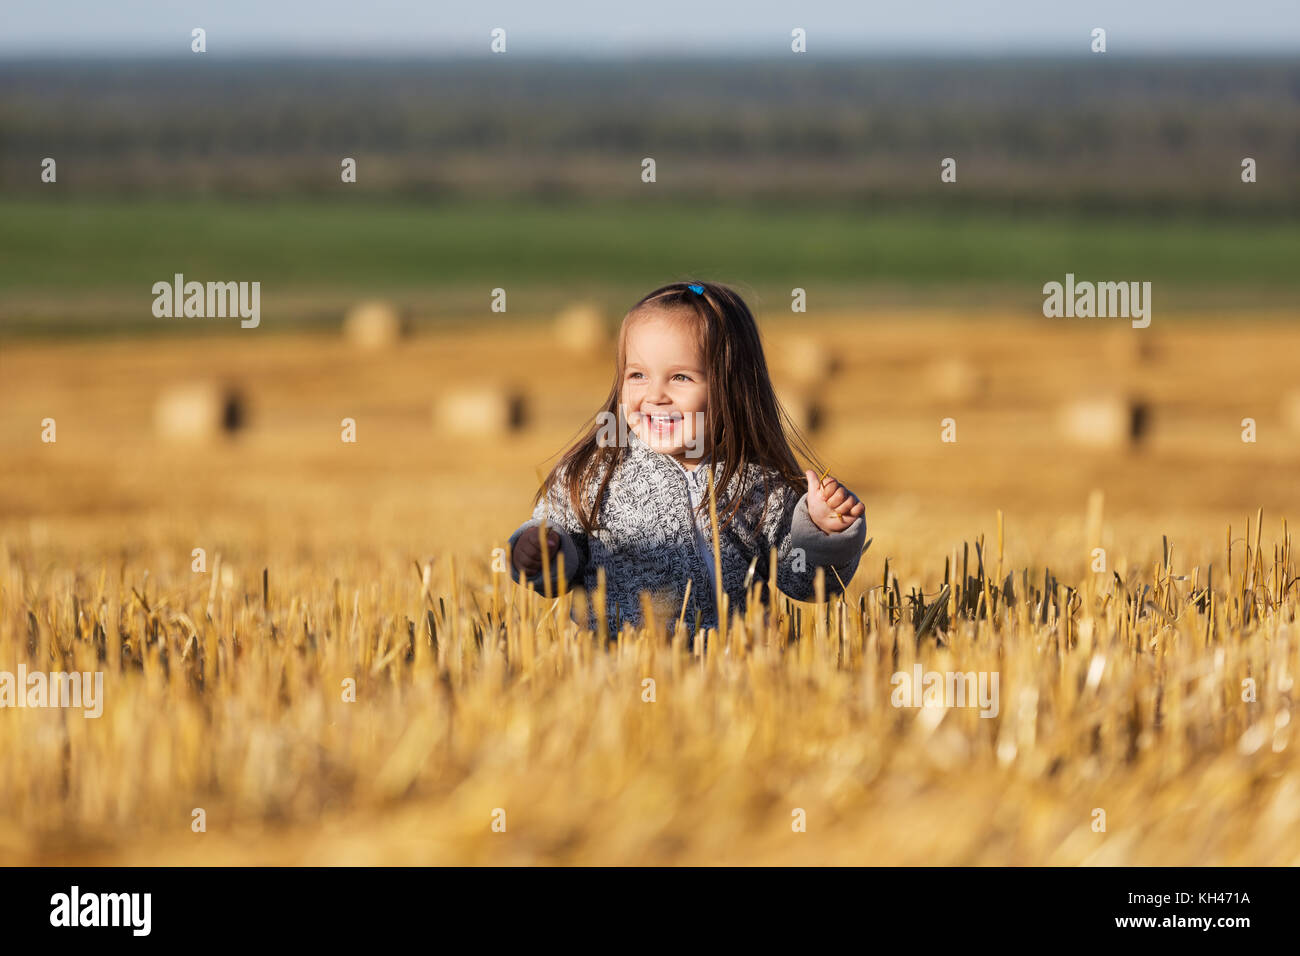 Happy 2 year old girl walking in a summer harvested field Stock Photo